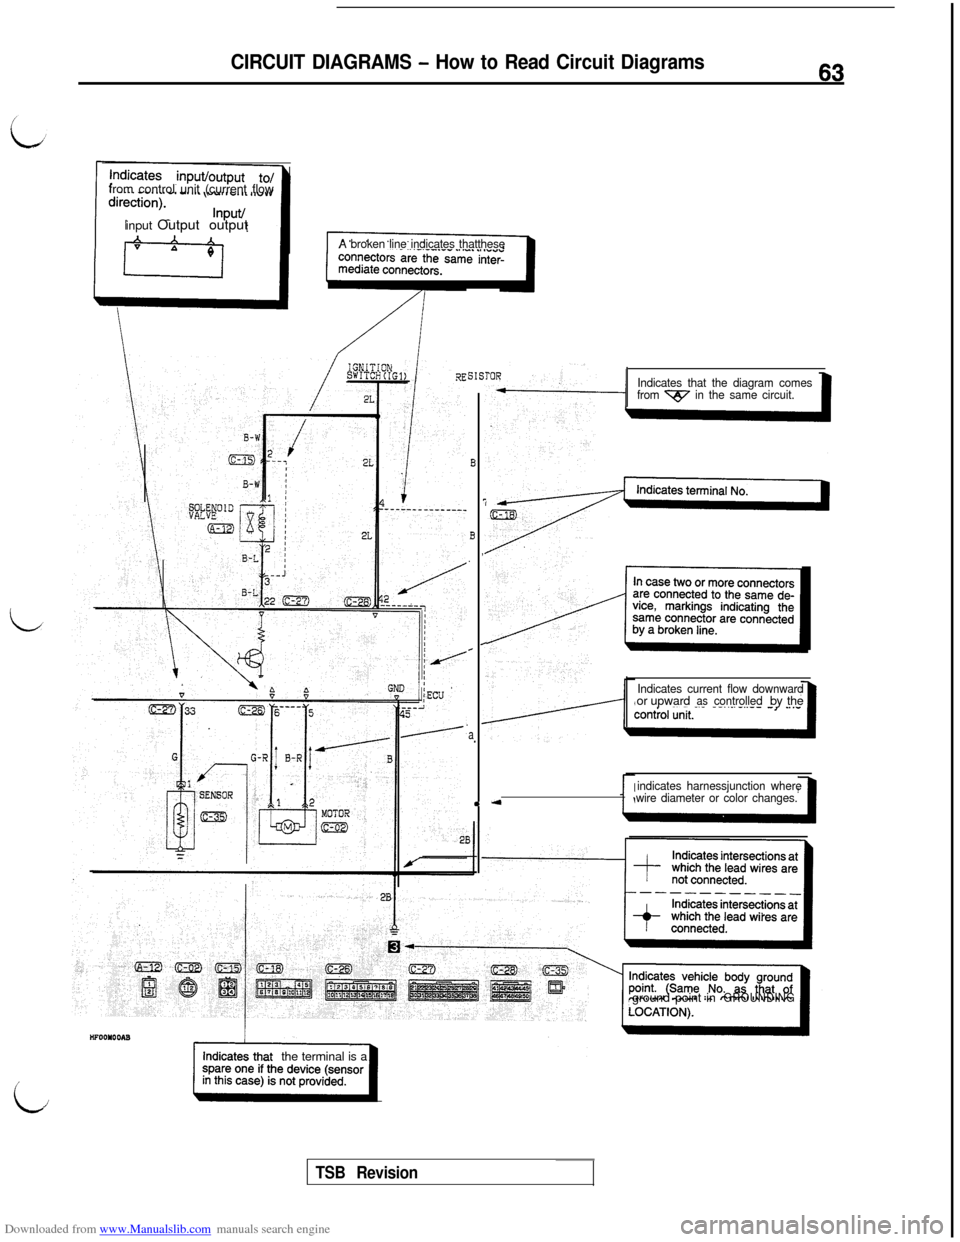 MITSUBISHI 3000GT 1995 2.G Repair Manual Downloaded from www.Manualslib.com manuals search engine CIRCUIT DIAGRAMS - How to Read Circuit Diagrams63from control unit (current flow
input Output output
A broken line indicates thatthese
B
i
B,
.